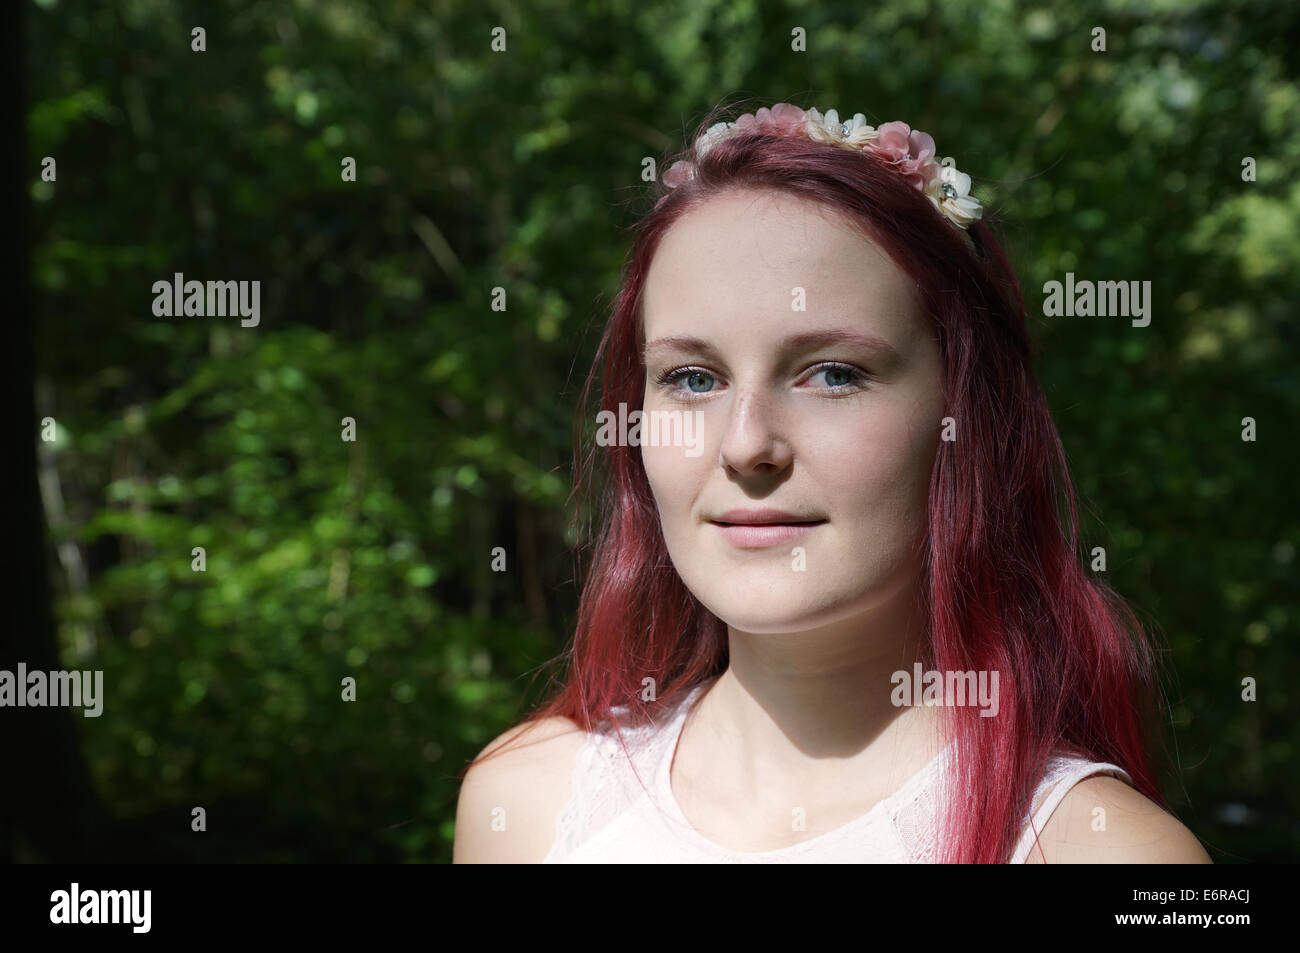 portrait of a young woman with flowers in her hair Stock Photo